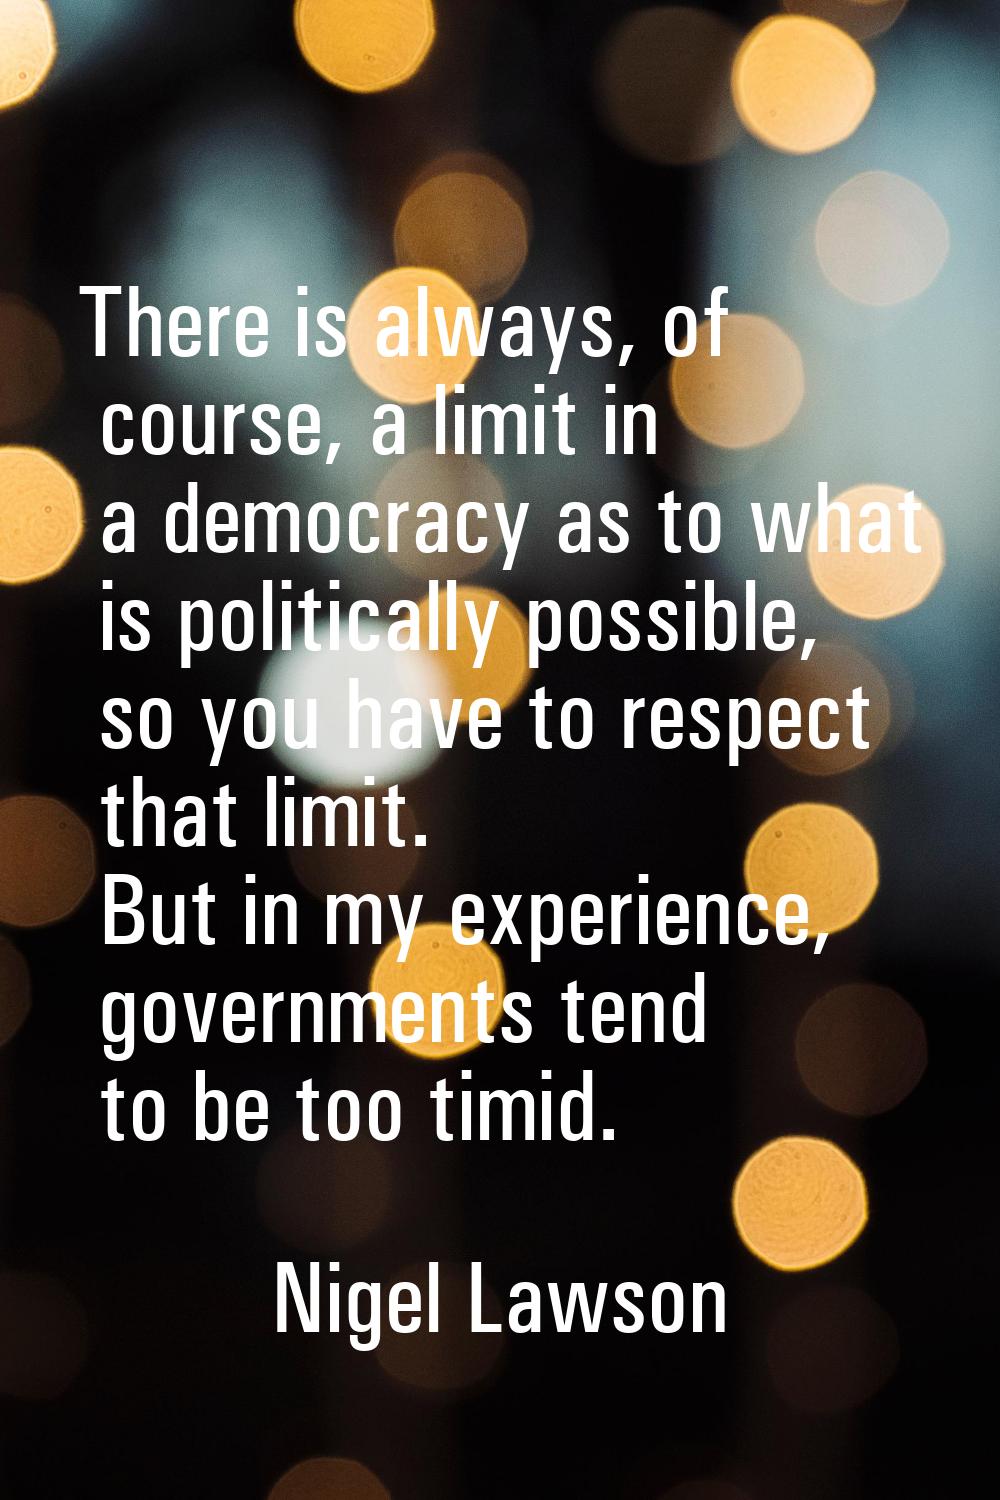 There is always, of course, a limit in a democracy as to what is politically possible, so you have 